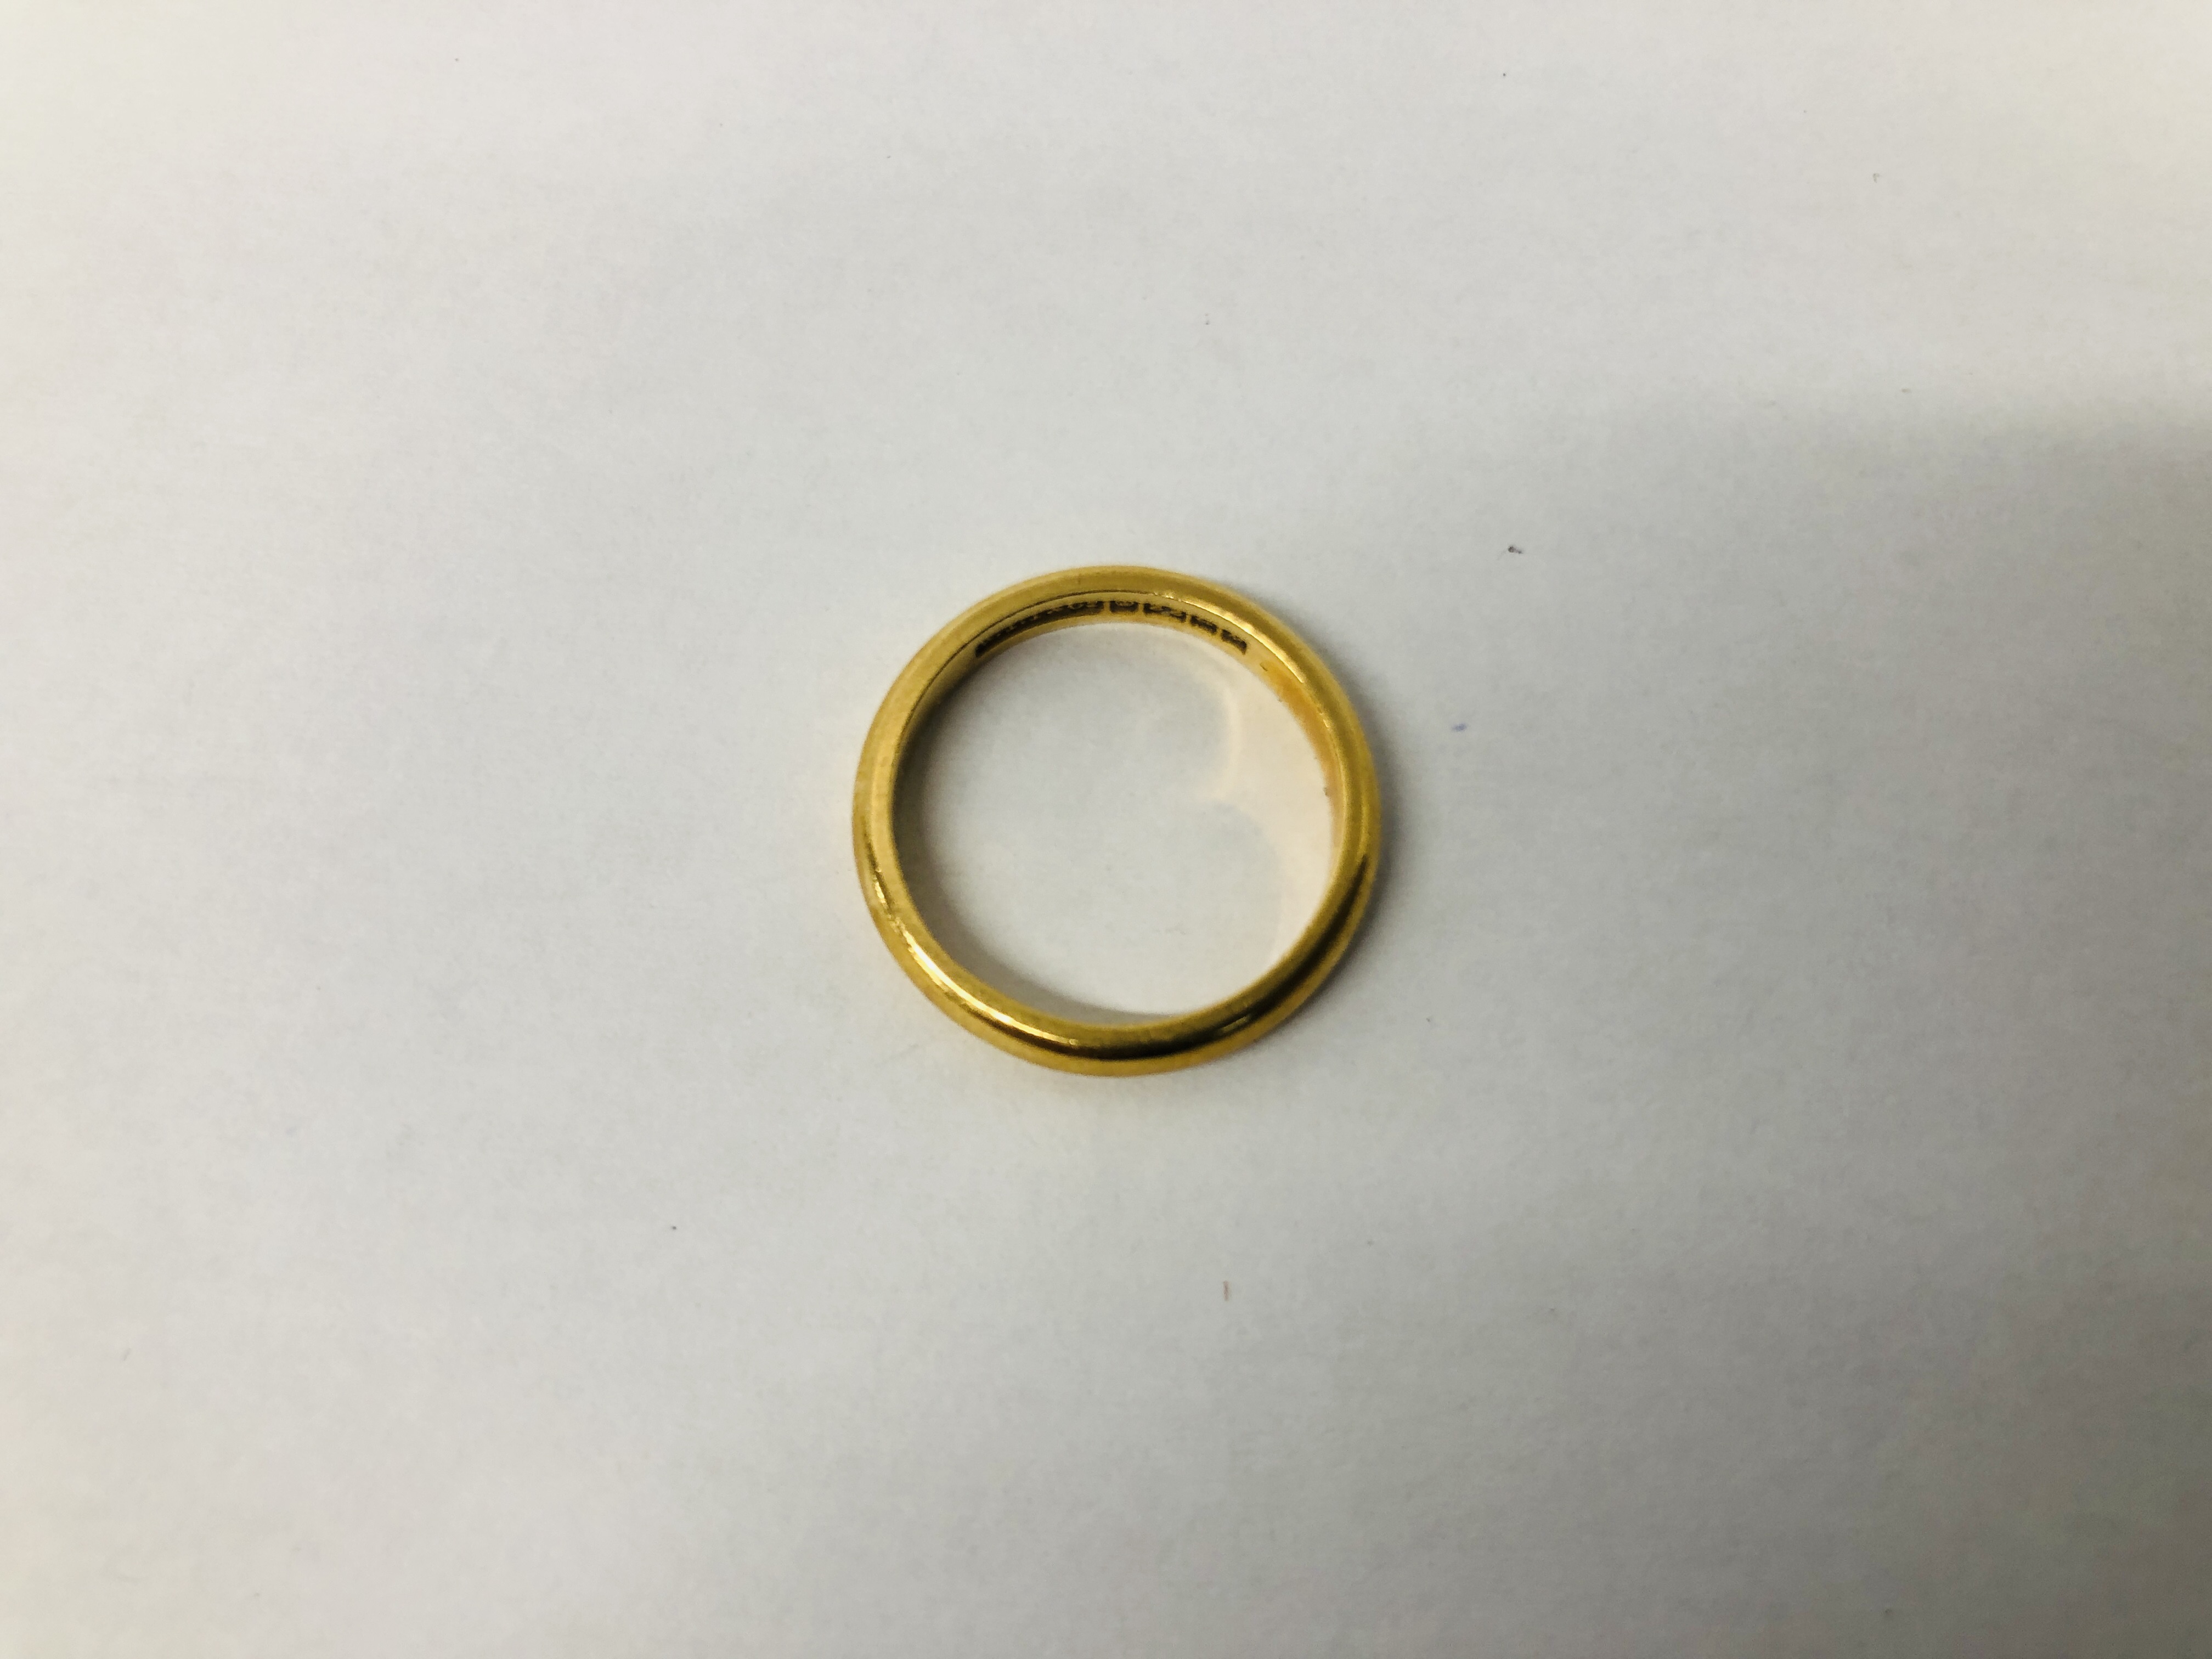 A 22CT GOLD WEDDING BAND. - Image 2 of 6